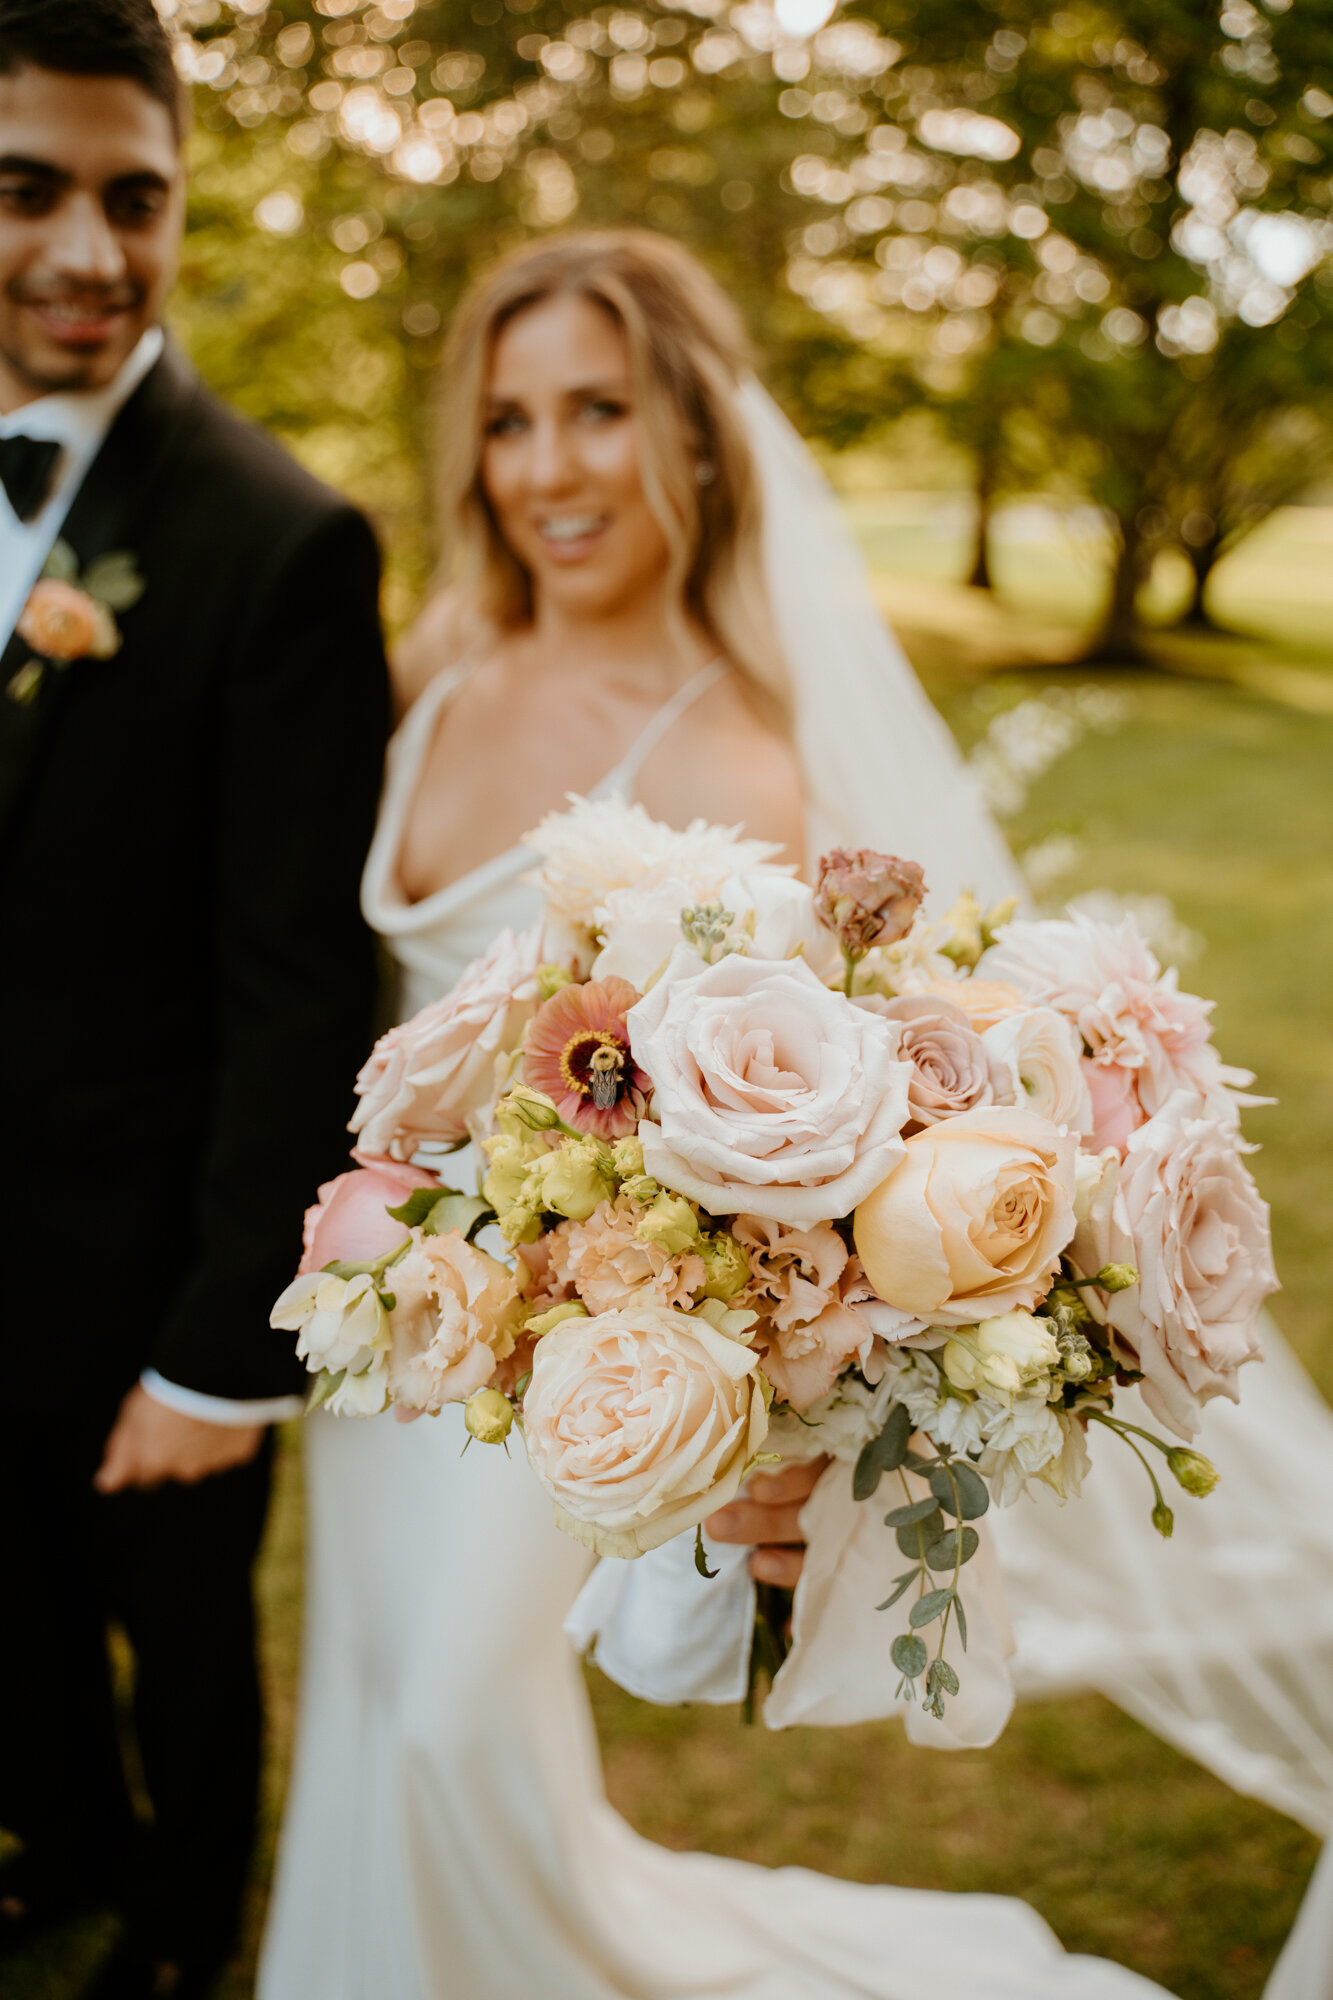 wedding bouquet with a bumble bee